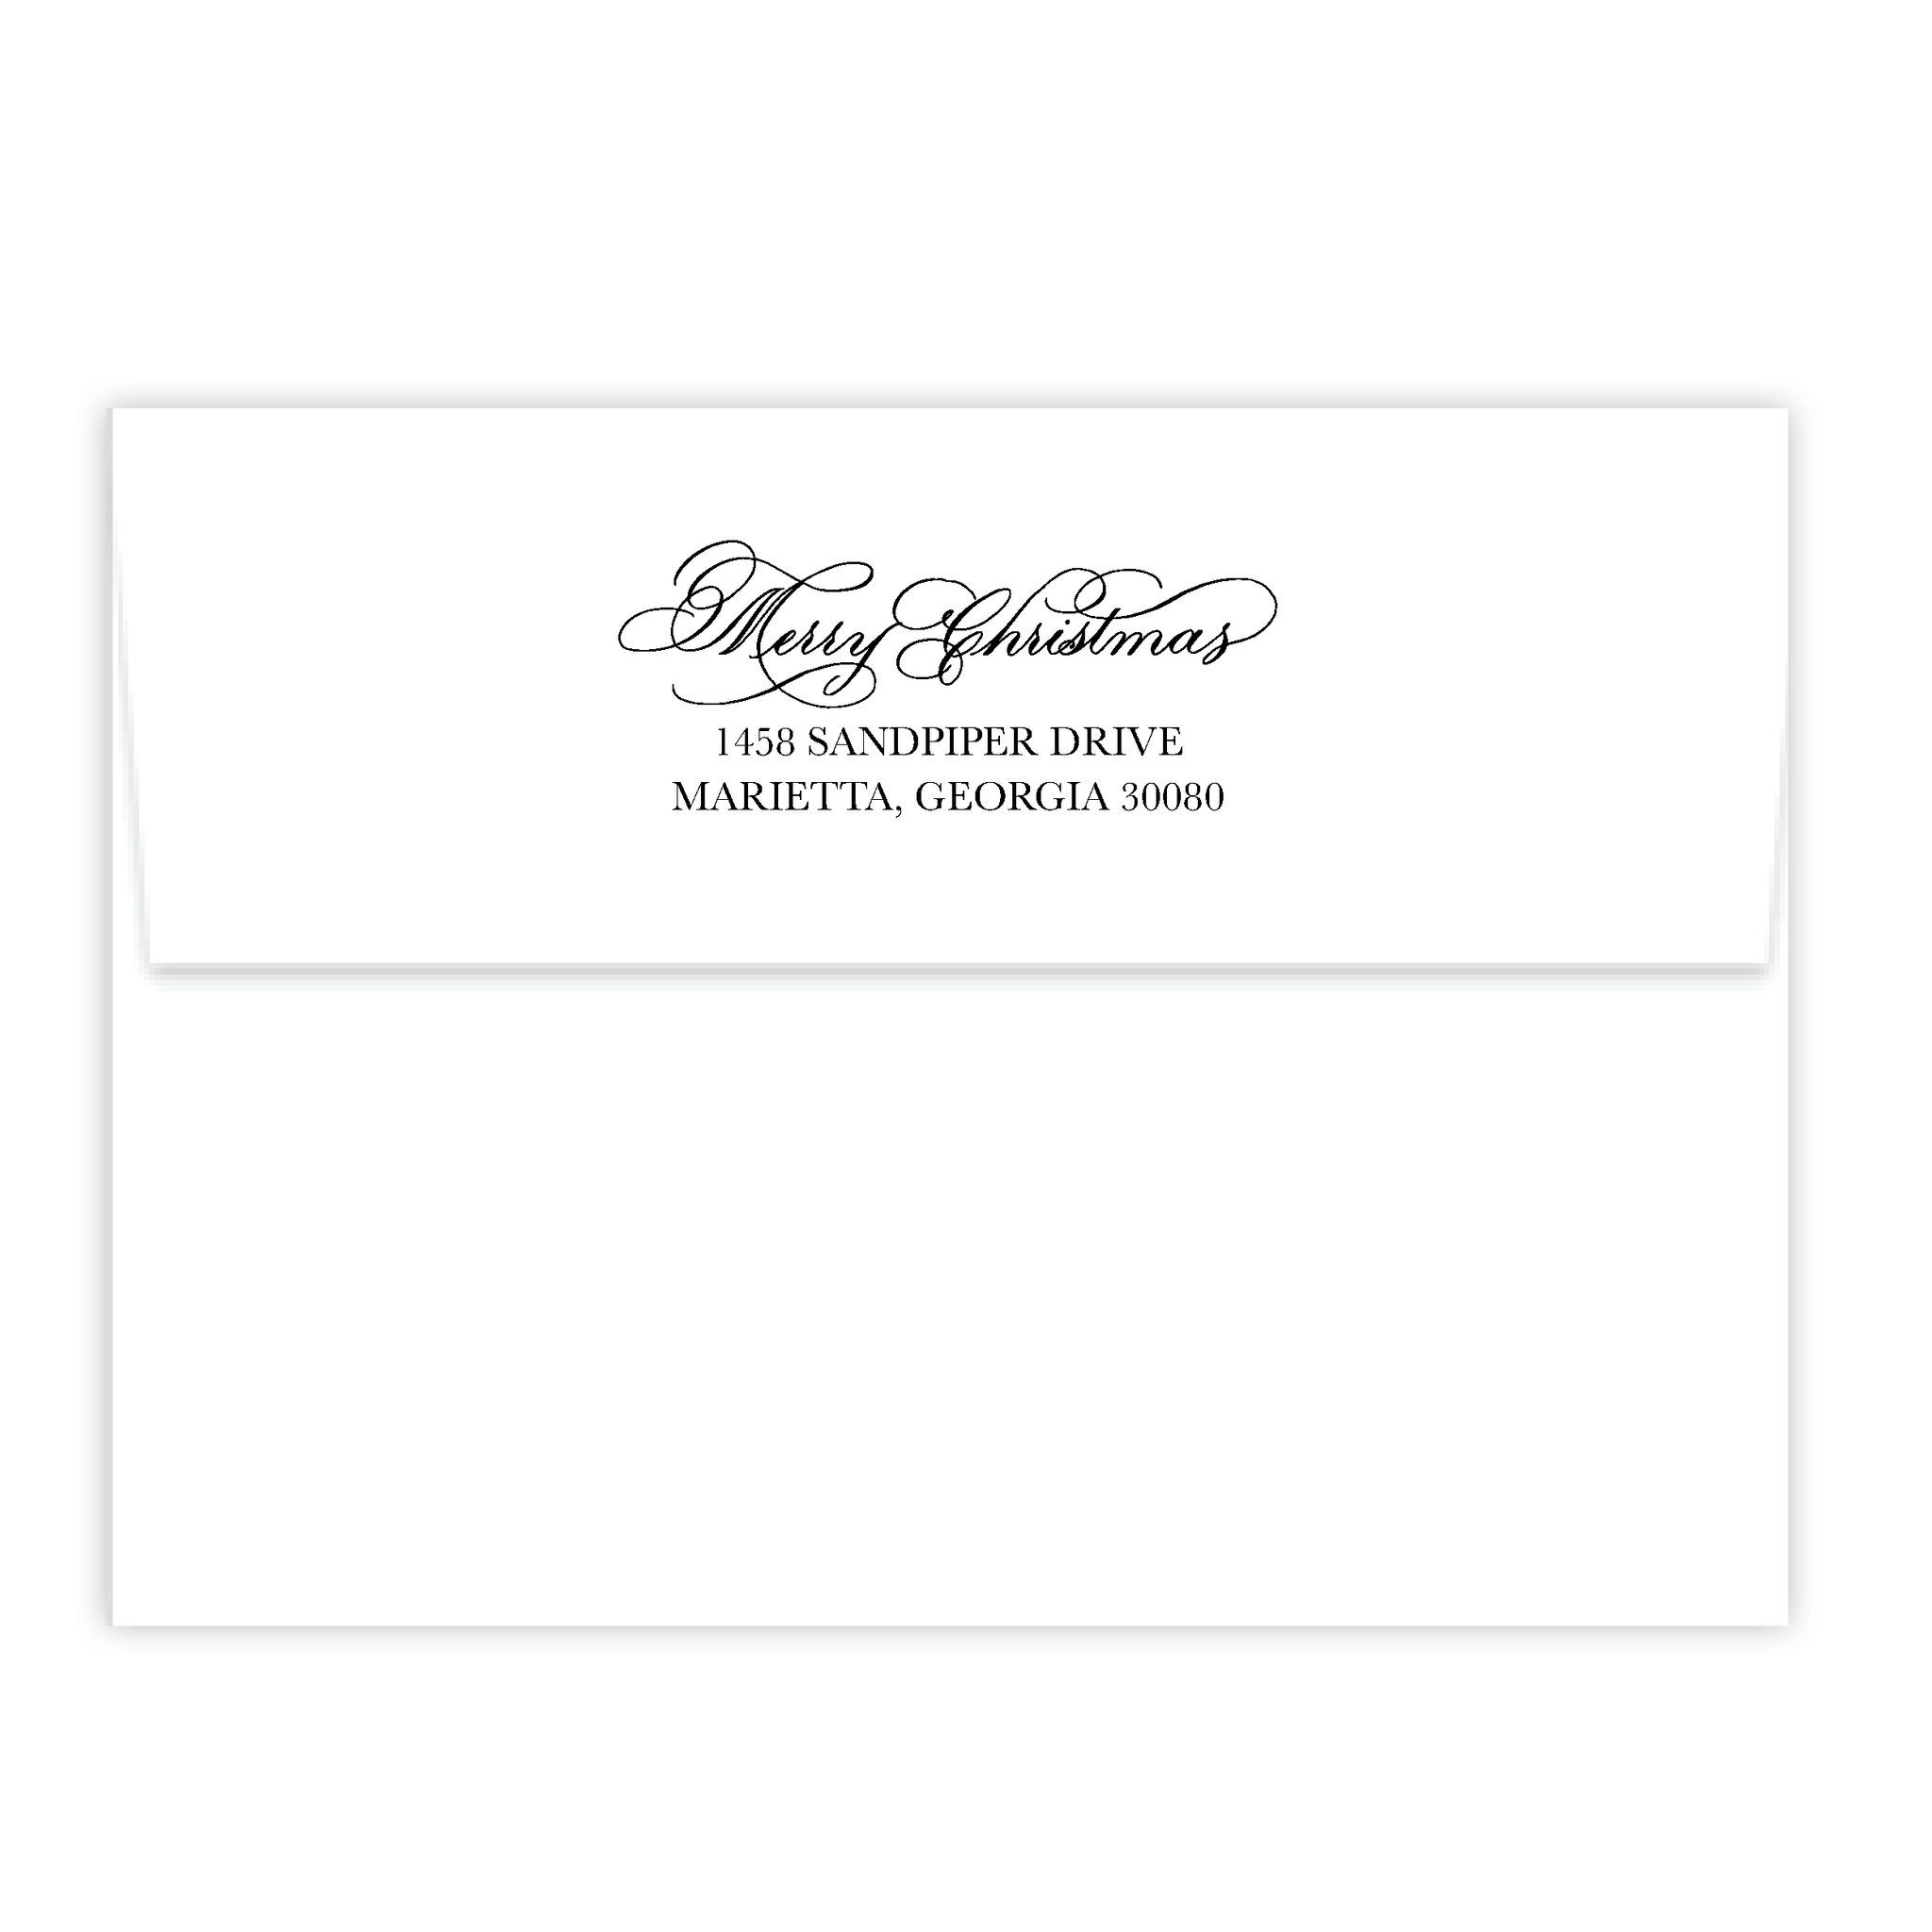 Merry Christmas Calligraphy Self Inking Stamp